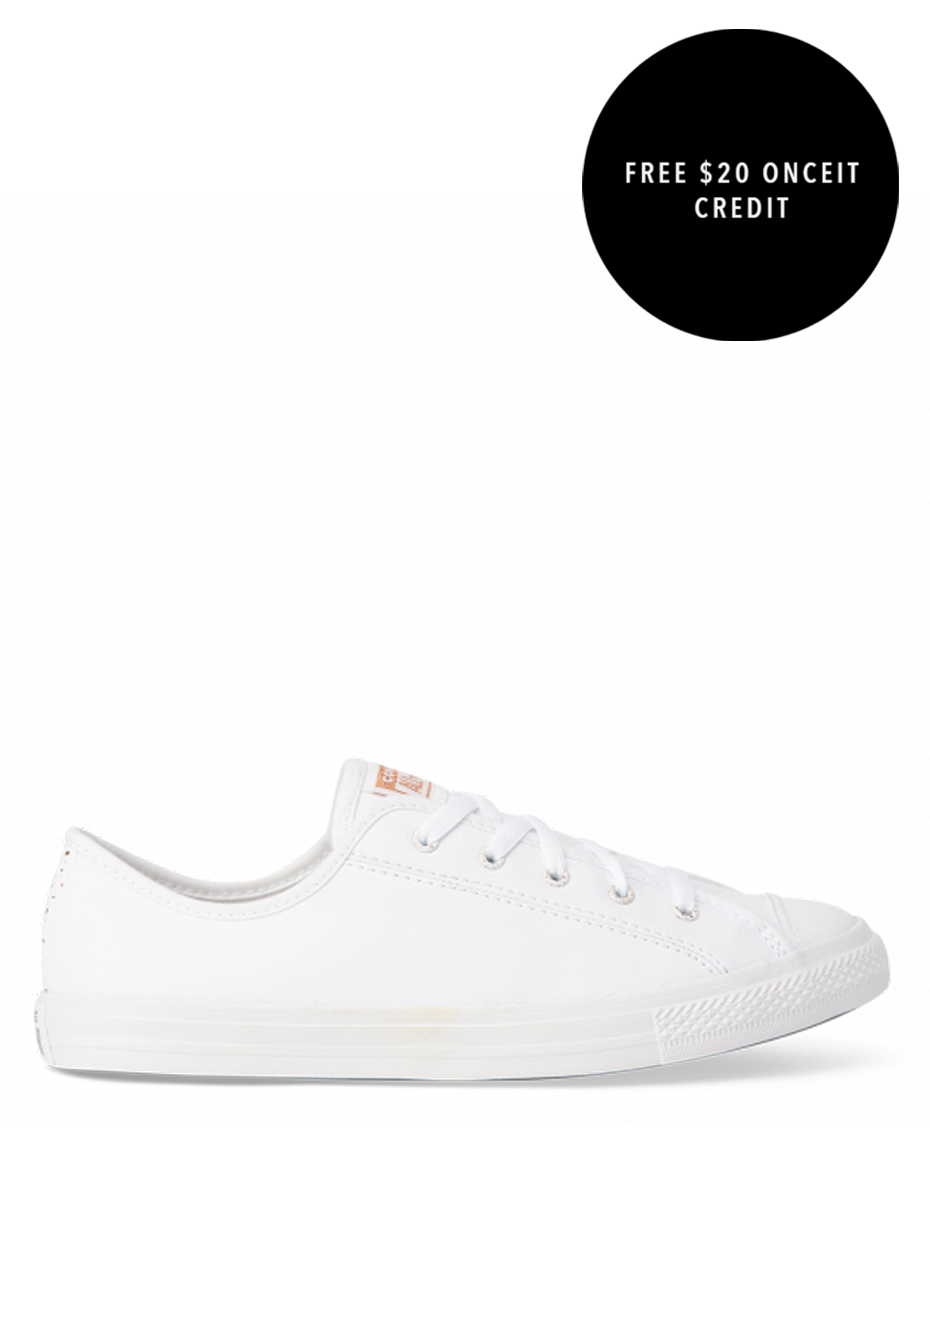 converse dainty white gold